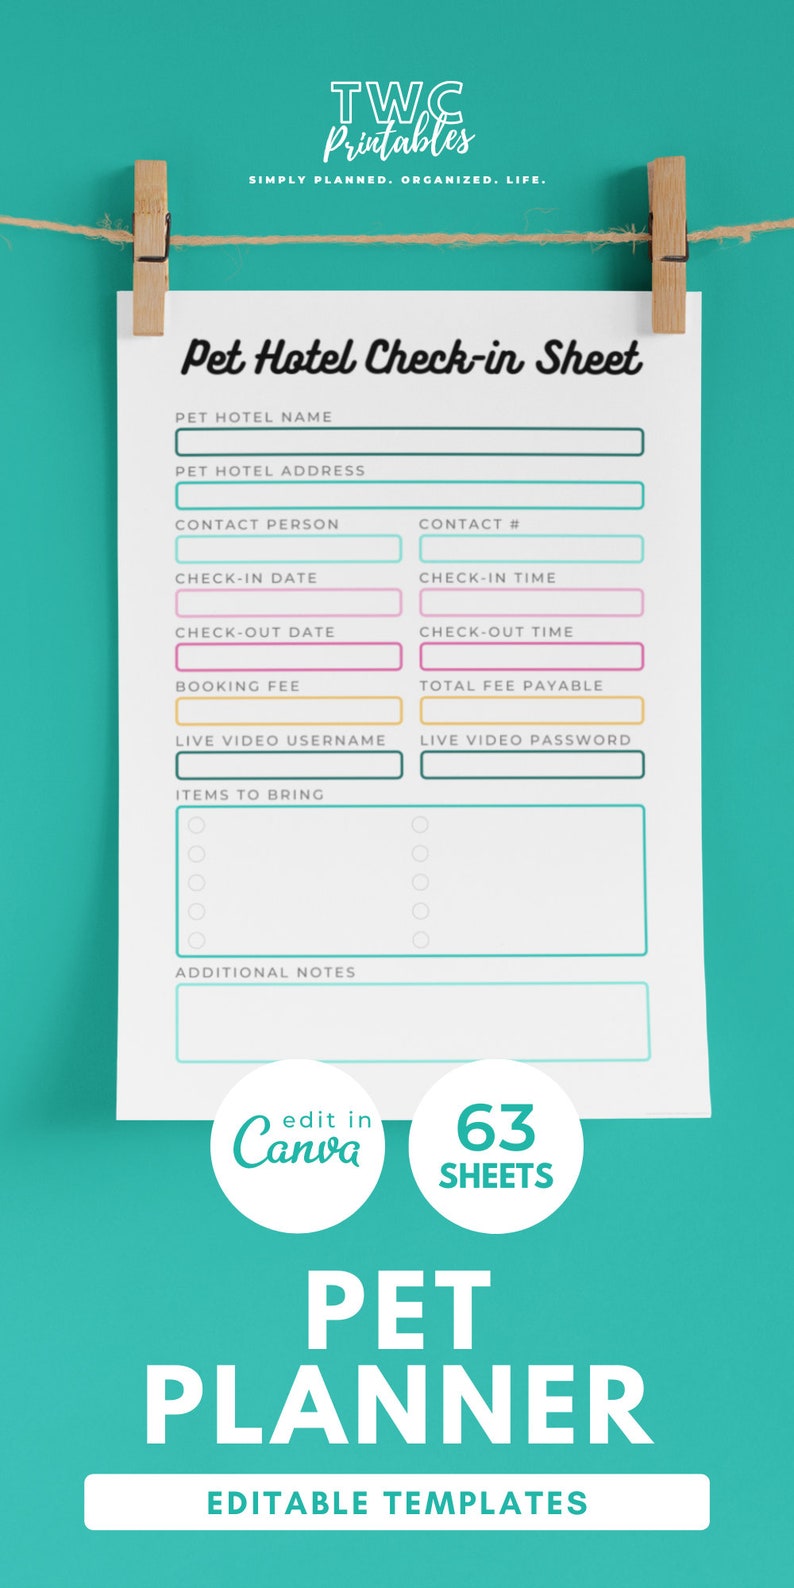 The editable pet planner templates for Canva will help you to create your own pet planner printable, or various pages for your pet organizer! Make your own pet care planner or puppy planner with this Canva kit! Also great as pet owner gifts.